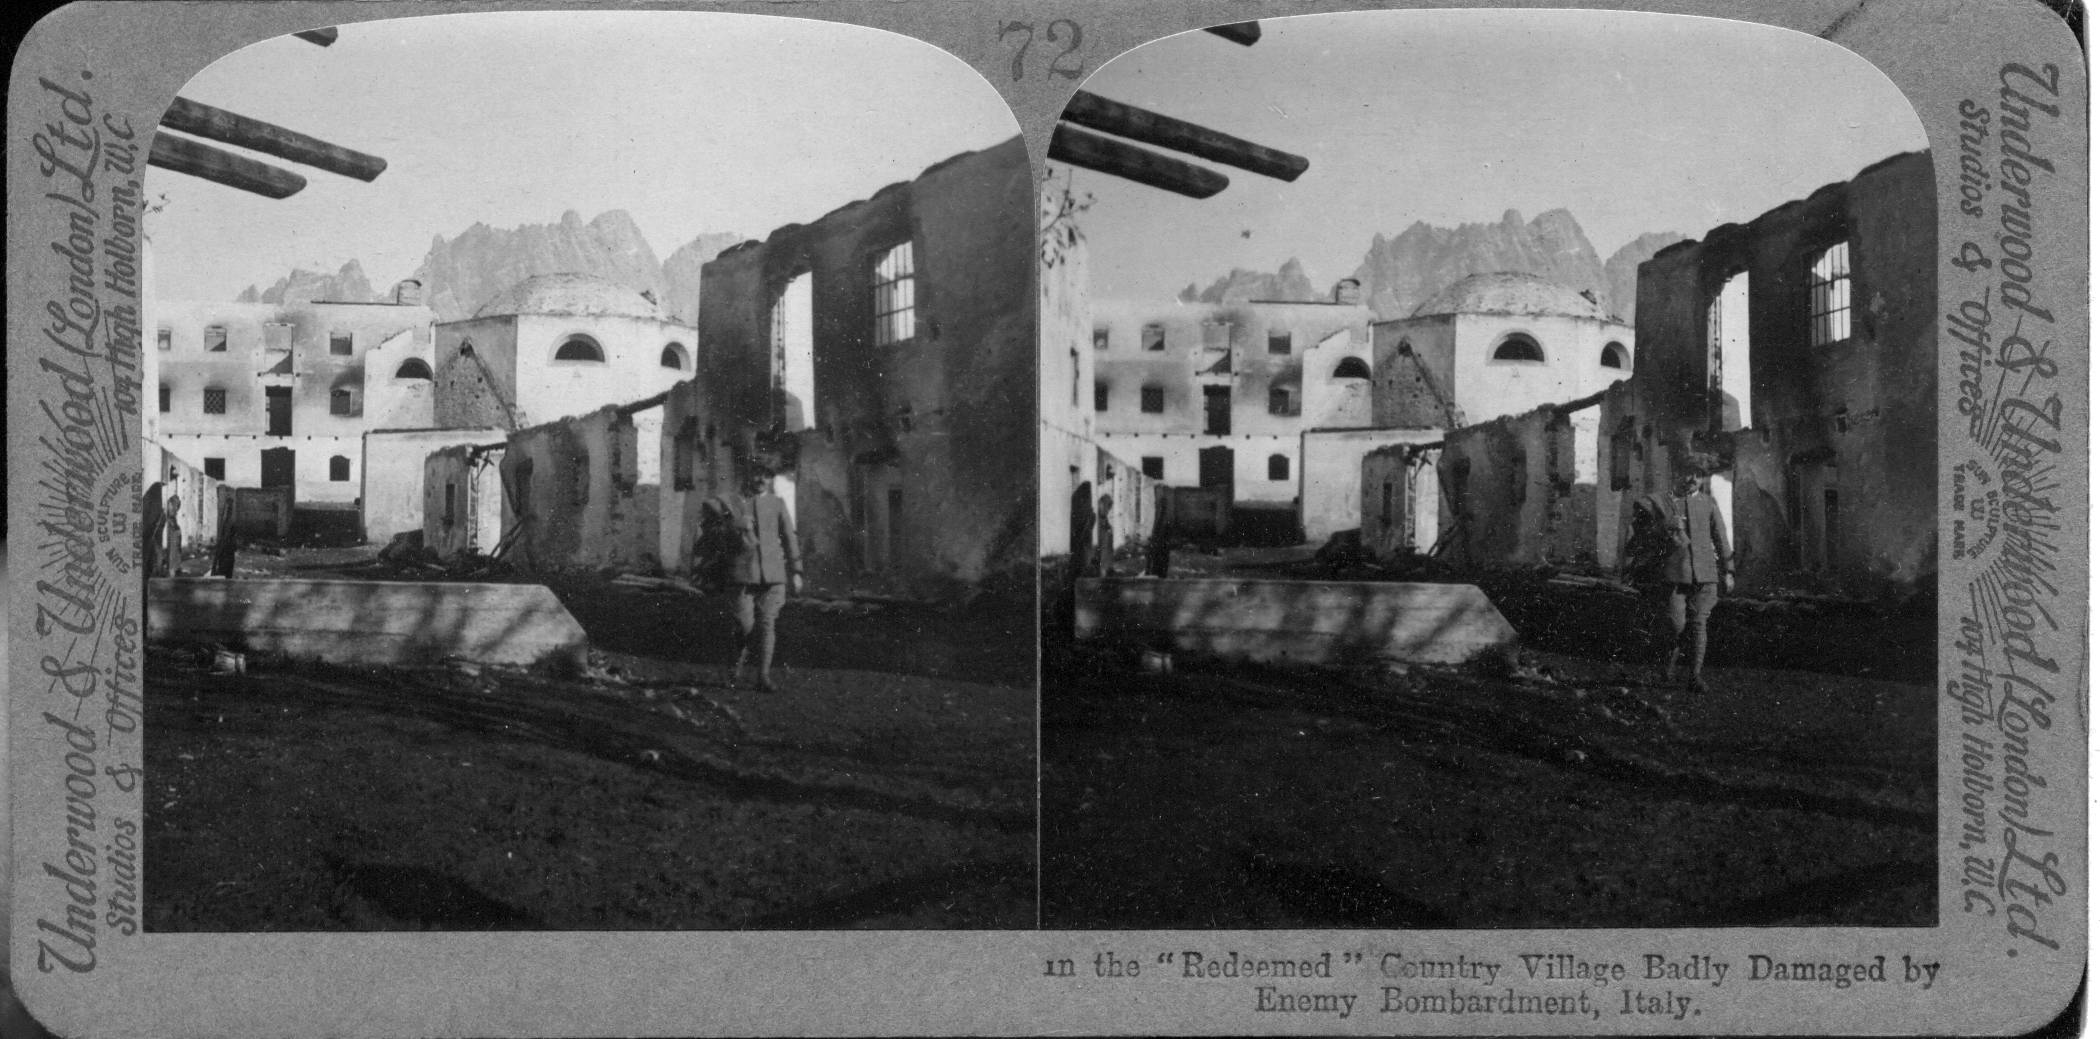 In the "Redeemed" Country Village Badly Damaged by Enemy Bombardment, Italy